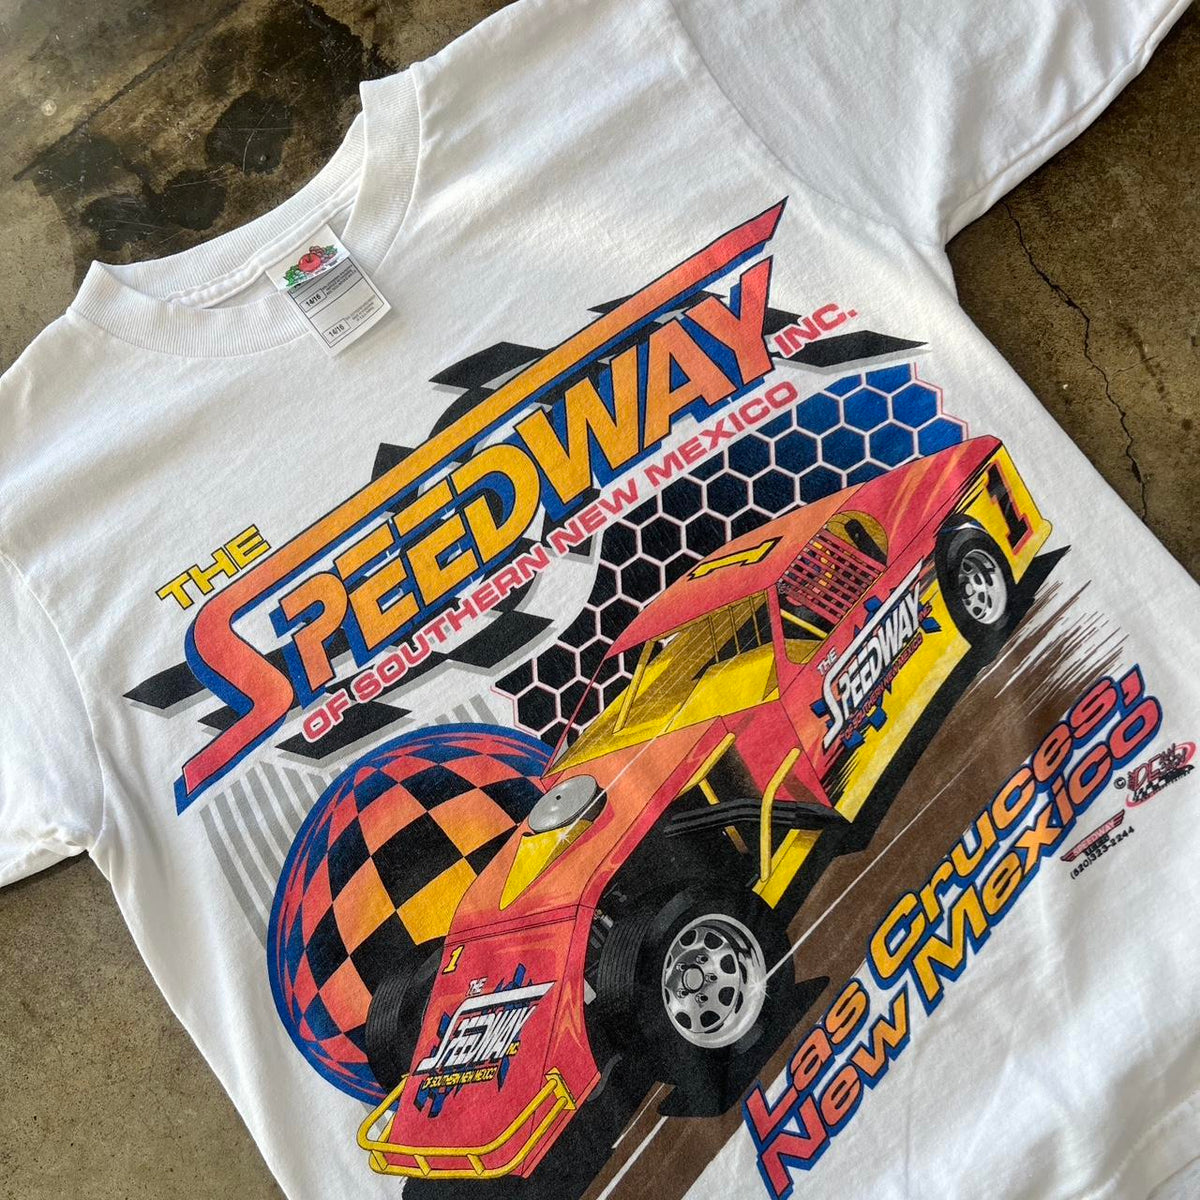 The Speedway of Southern New Mexico Tee